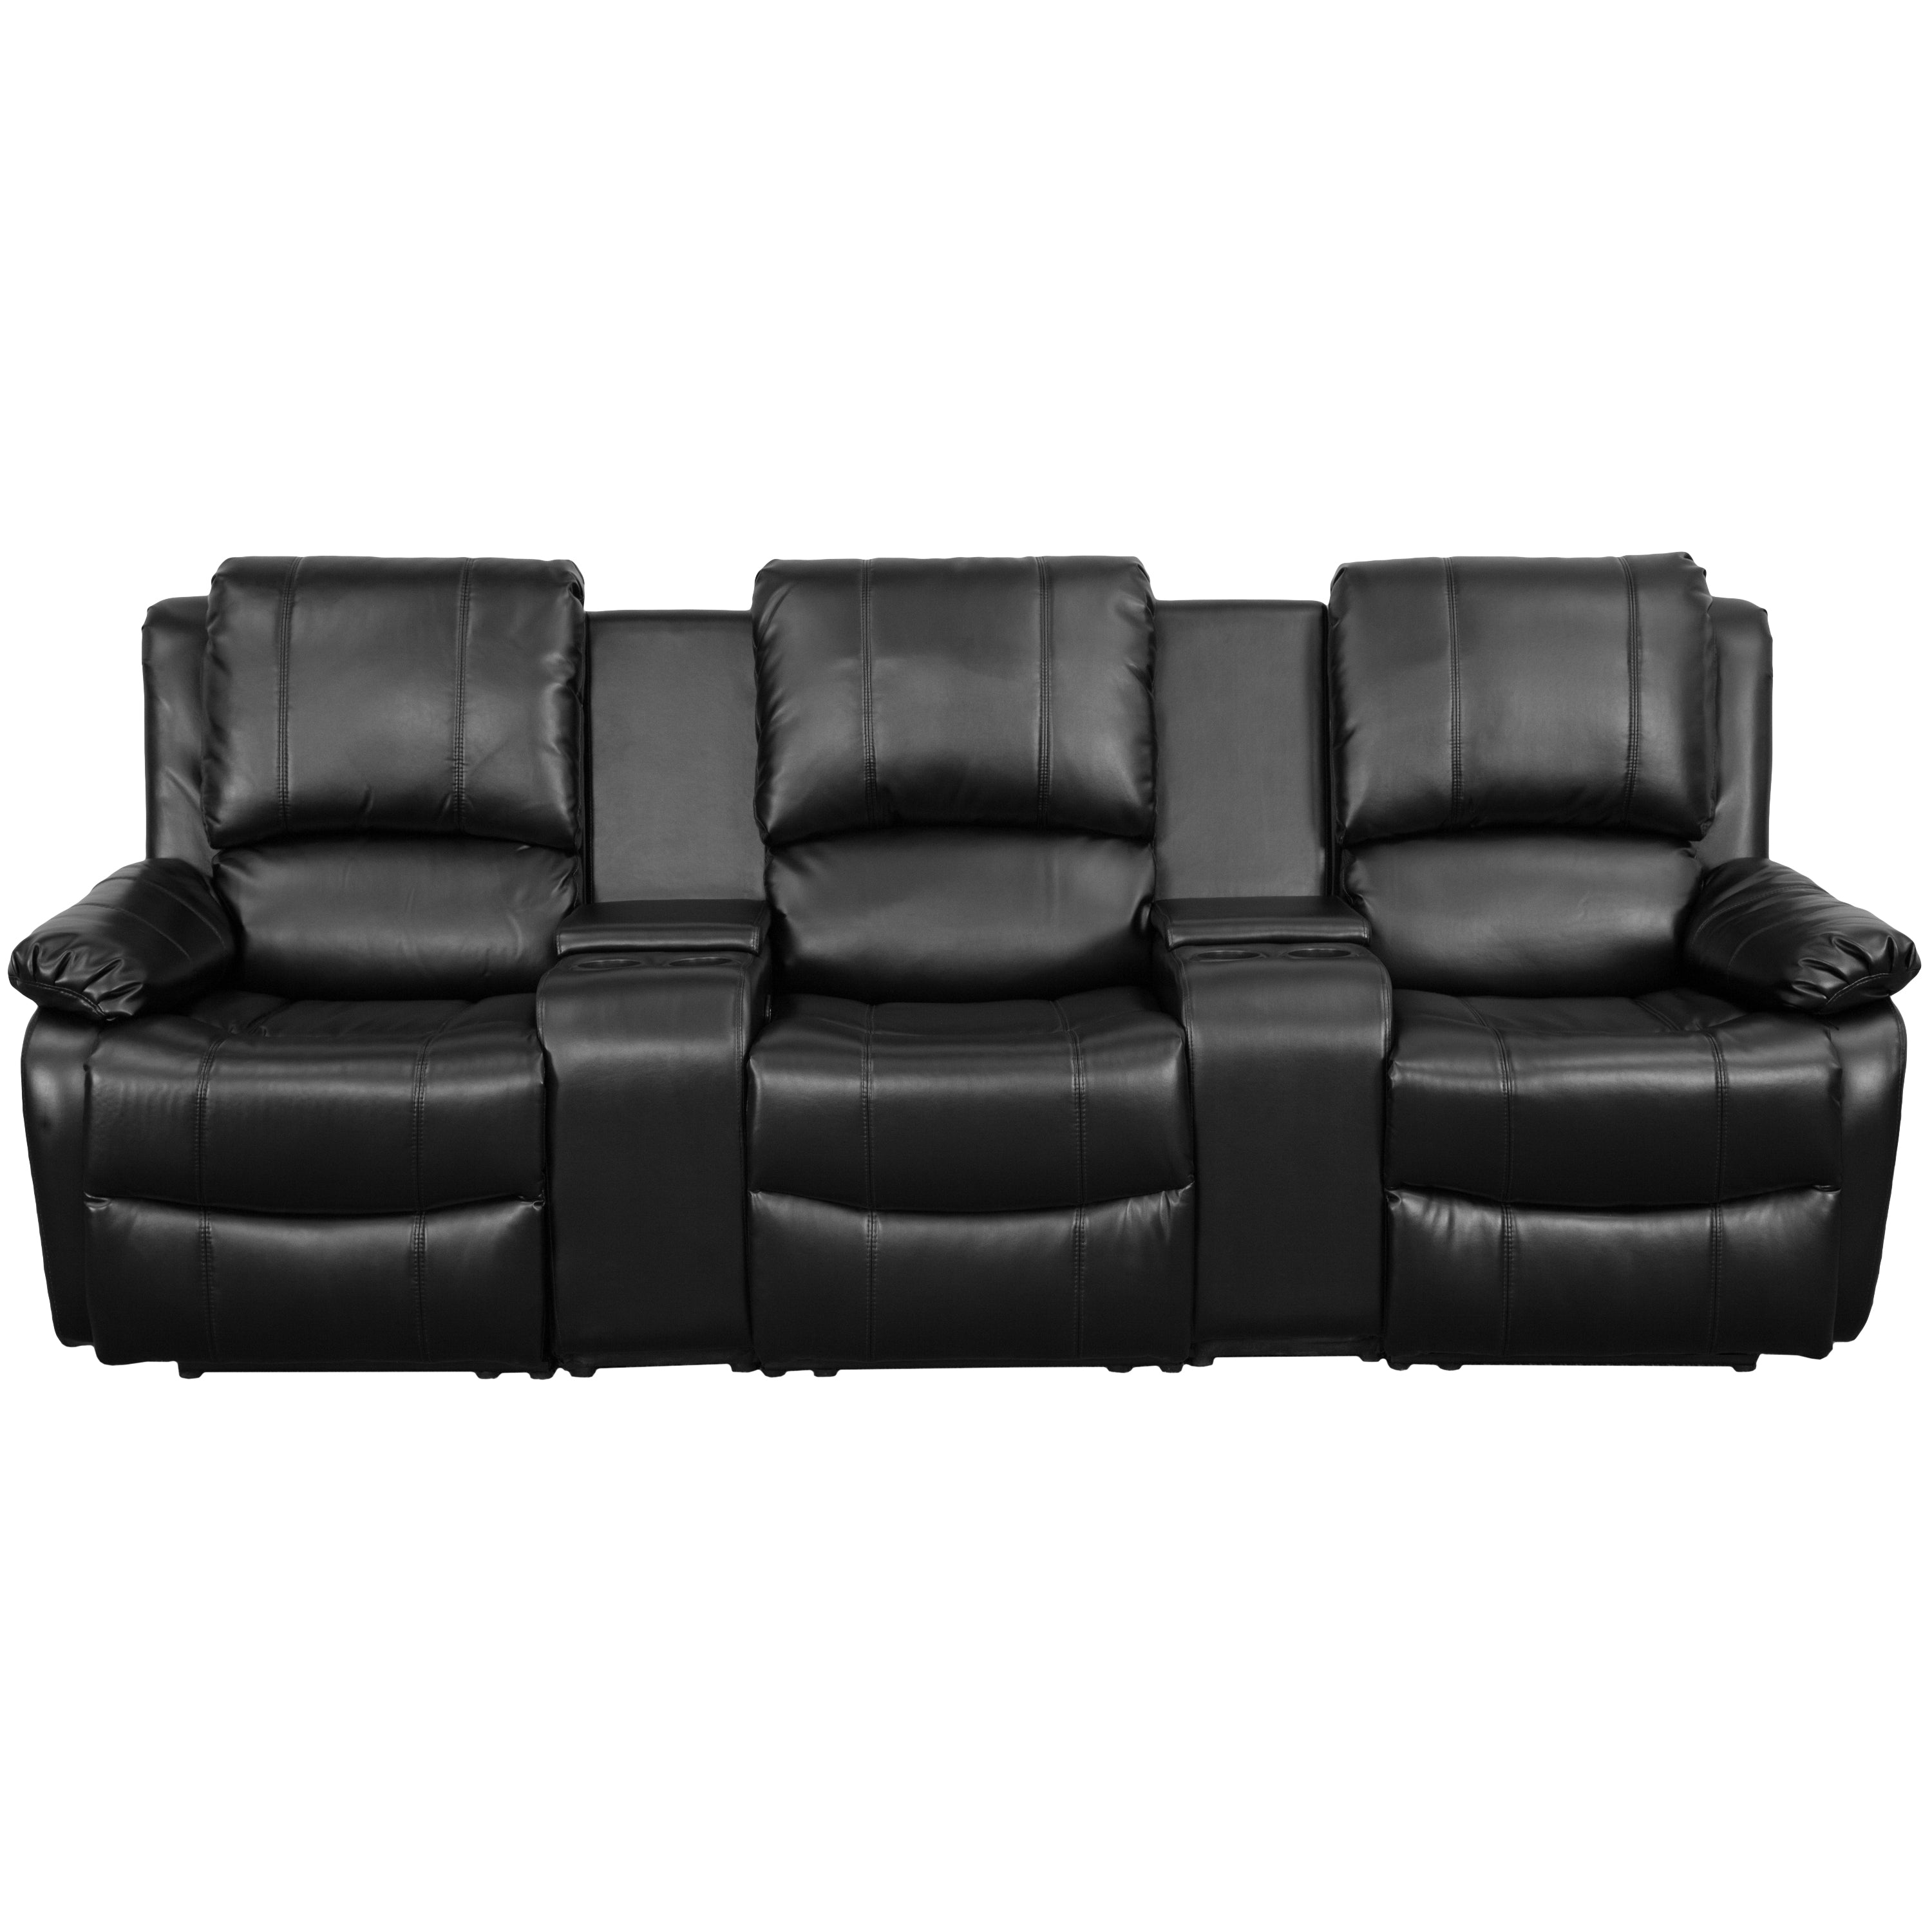 Allure Series 3-Seat Reclining Pillow Back LeatherSoft Theater Seating Unit with Cup Holders-Theater Seating-Flash Furniture-Wall2Wall Furnishings